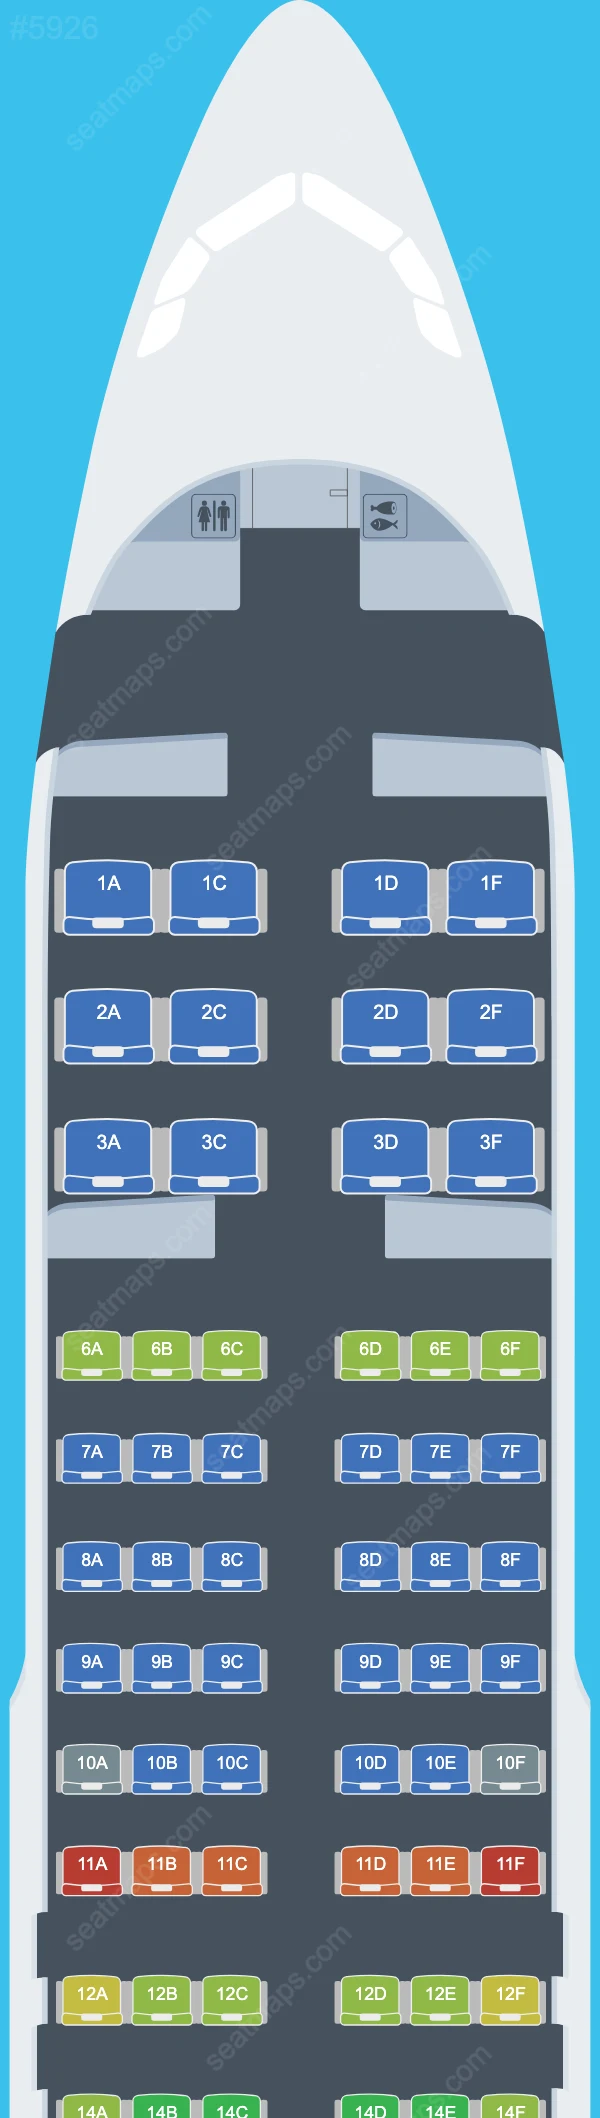 SriLankan Airlines Airbus A320 Seat Maps A320-200 V.3